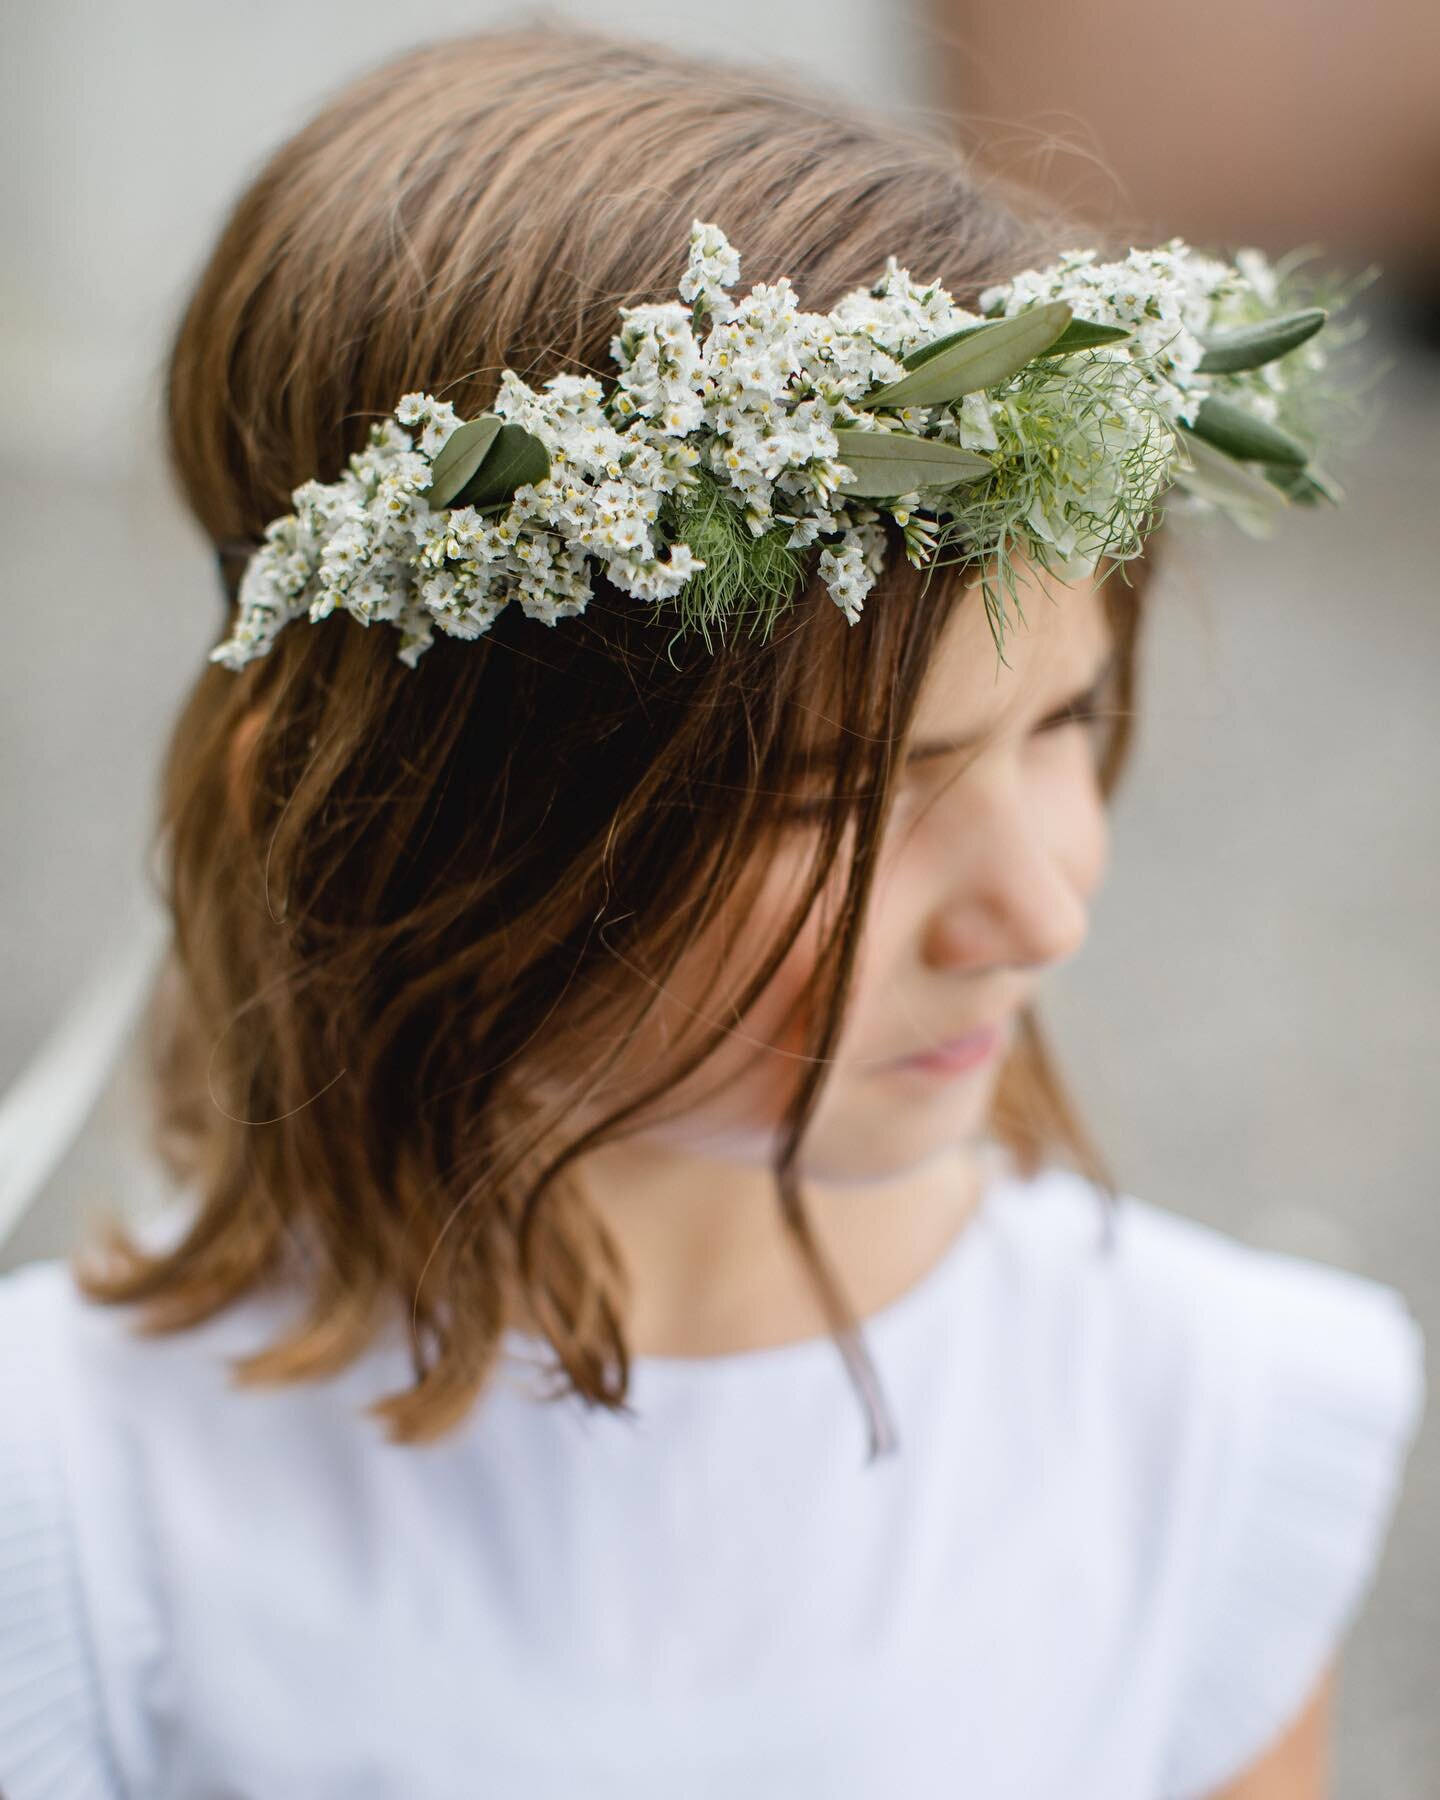 Flower crowns for pretty flower girls. I cannot think of a better way to have young girls wear flowers at a wedding. They allow them to move freely and forget they are wearing them. I so loved doing this wedding last summer in Herisau, Switzerland. A